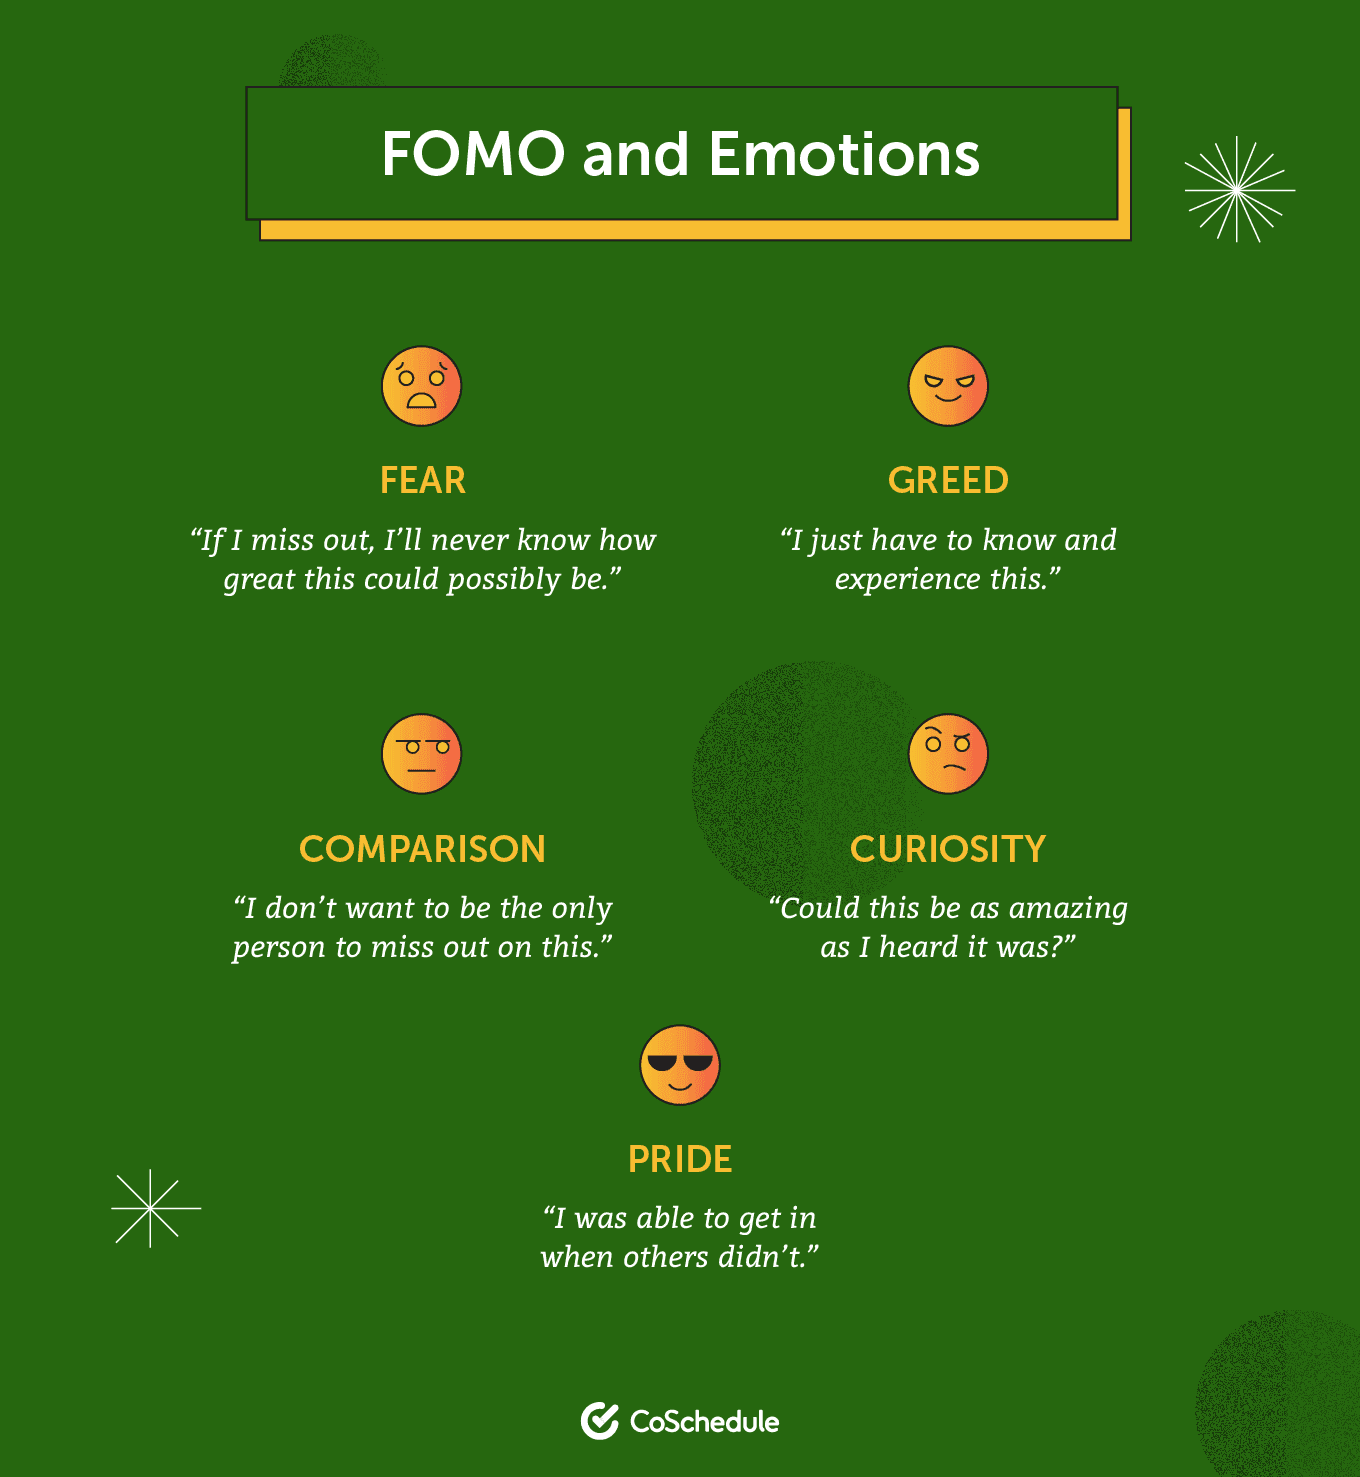 FOMO and emotions